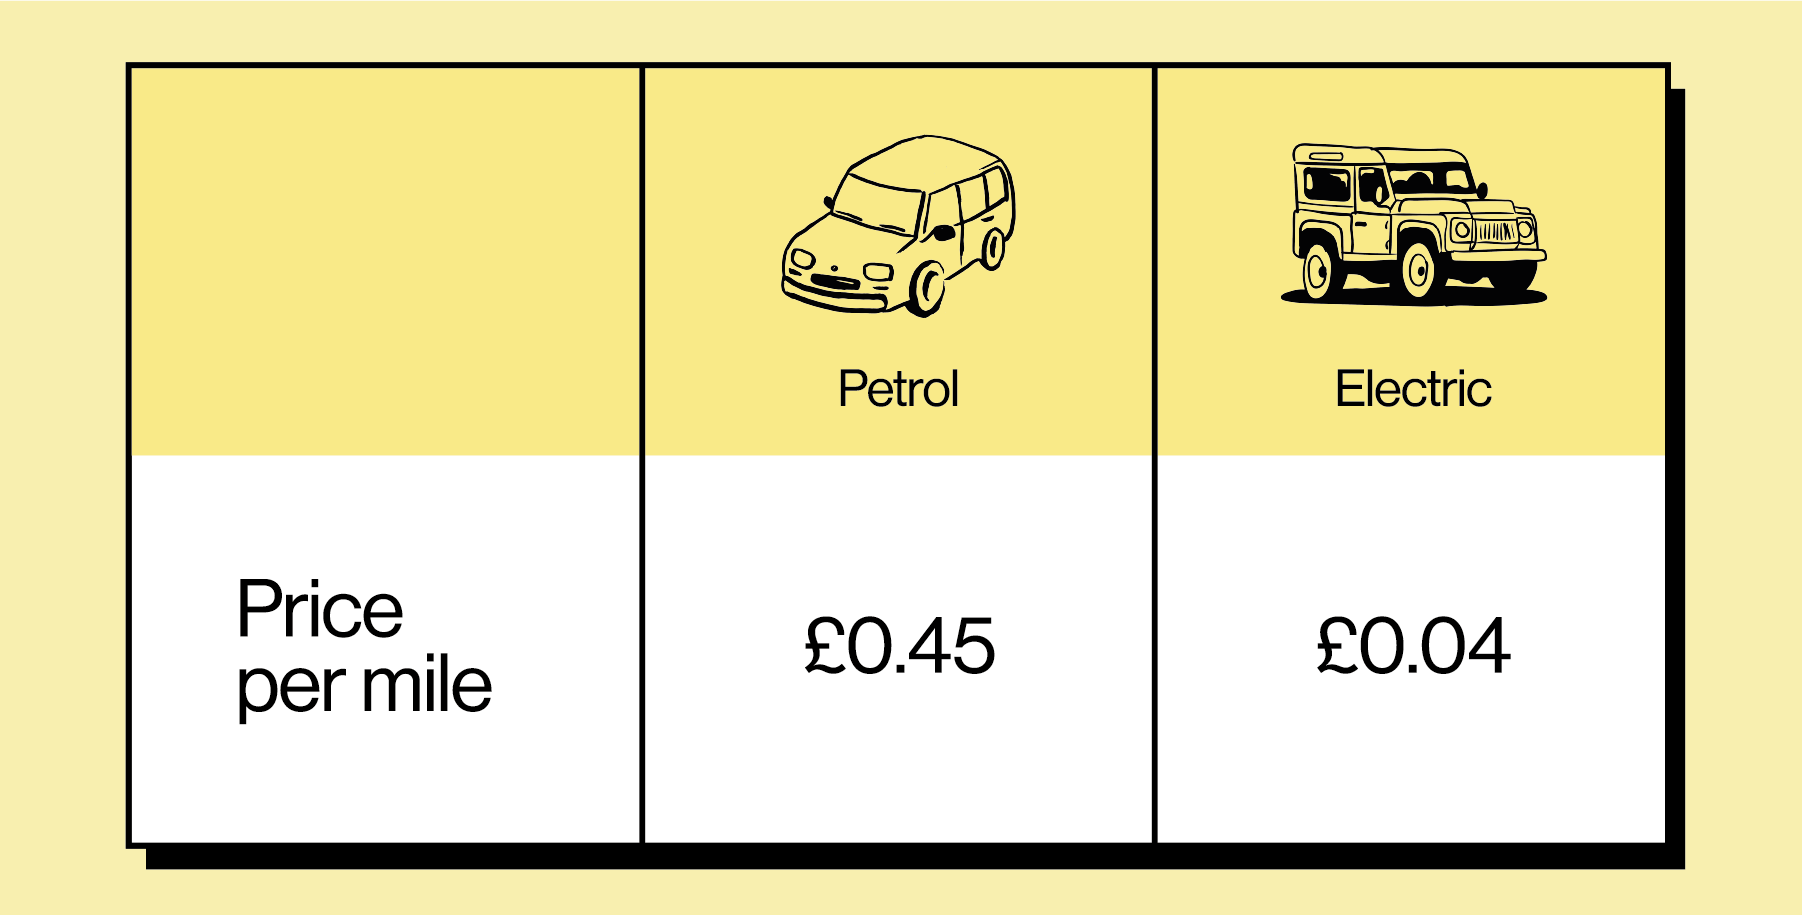 Table showing the price per mile rates